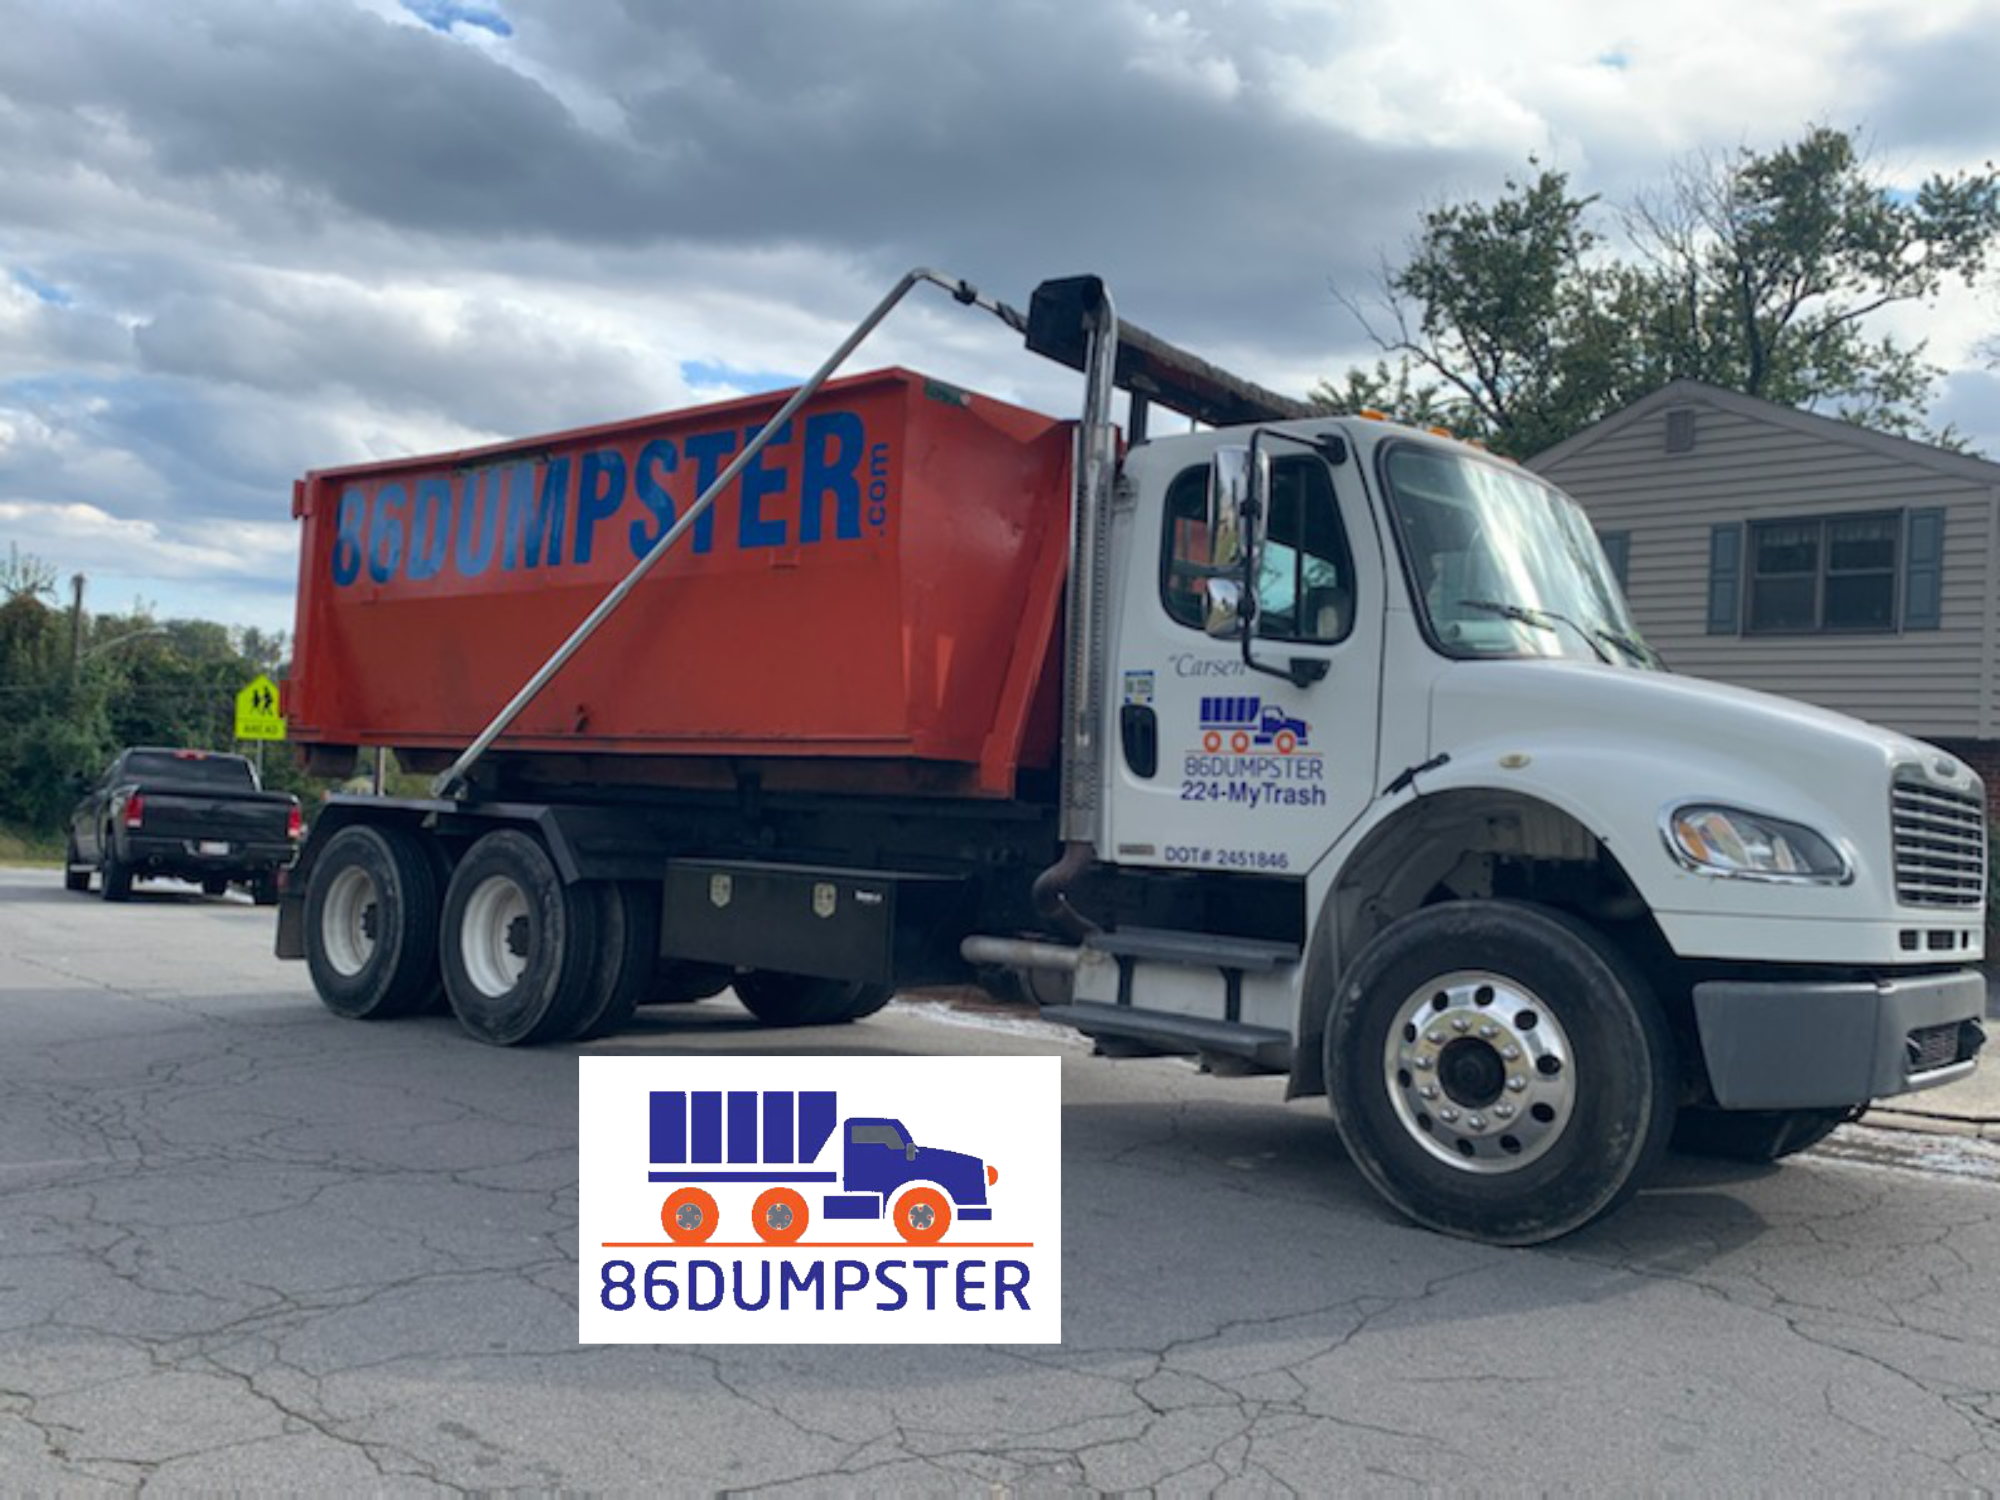 Book a Dumpster Rental 86 Dumpster Bel Air MD and Contractors Use for All Projects